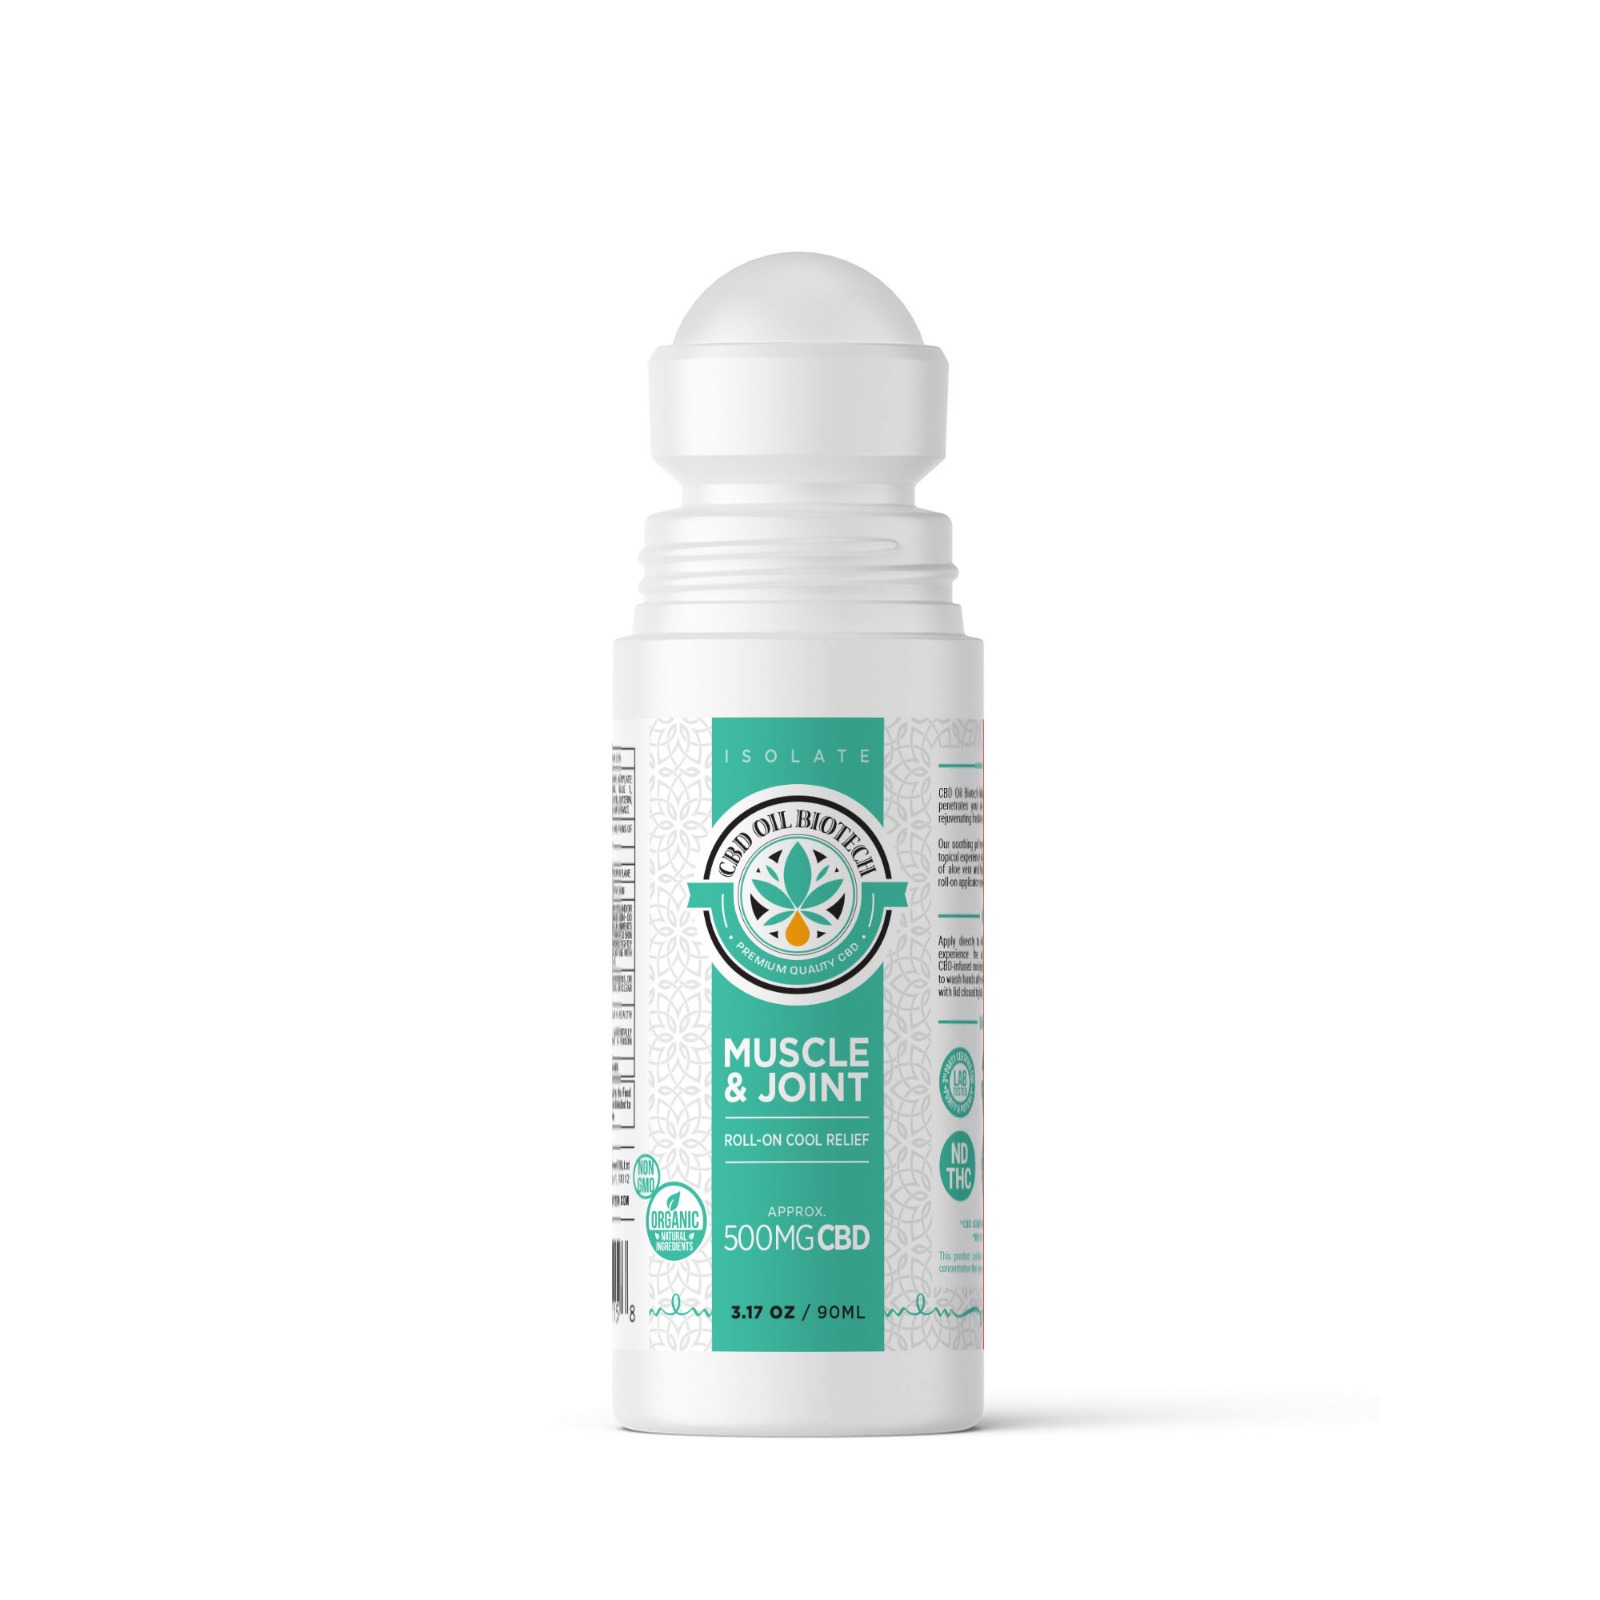 CBD Oil Biotech Muscle and Joint Roll-On Cool Relief - 500mg - Diamond CBD